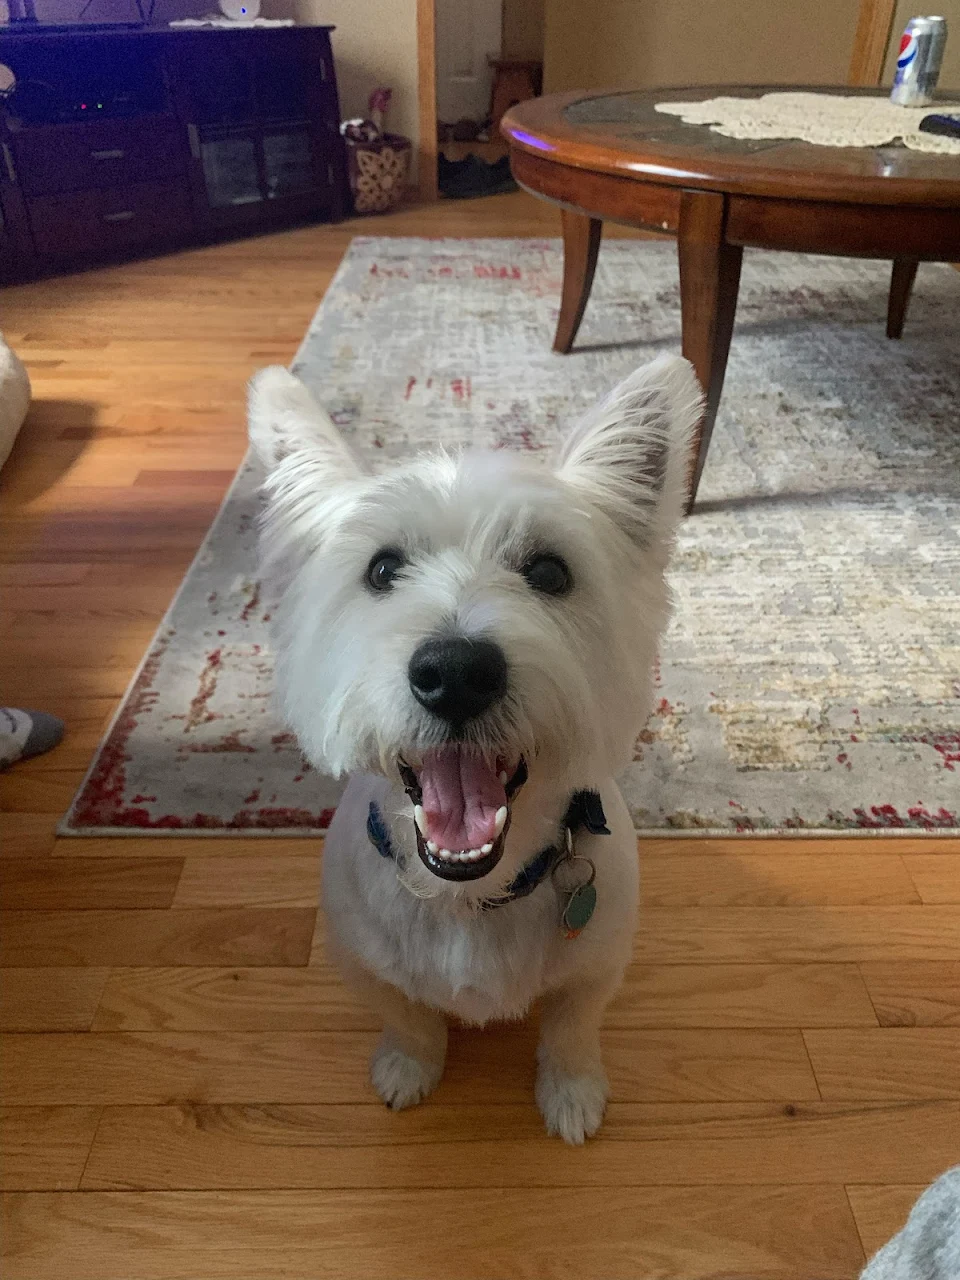 Marshall is so happy he got his hair cut! Now he’s cool as a cucumber!